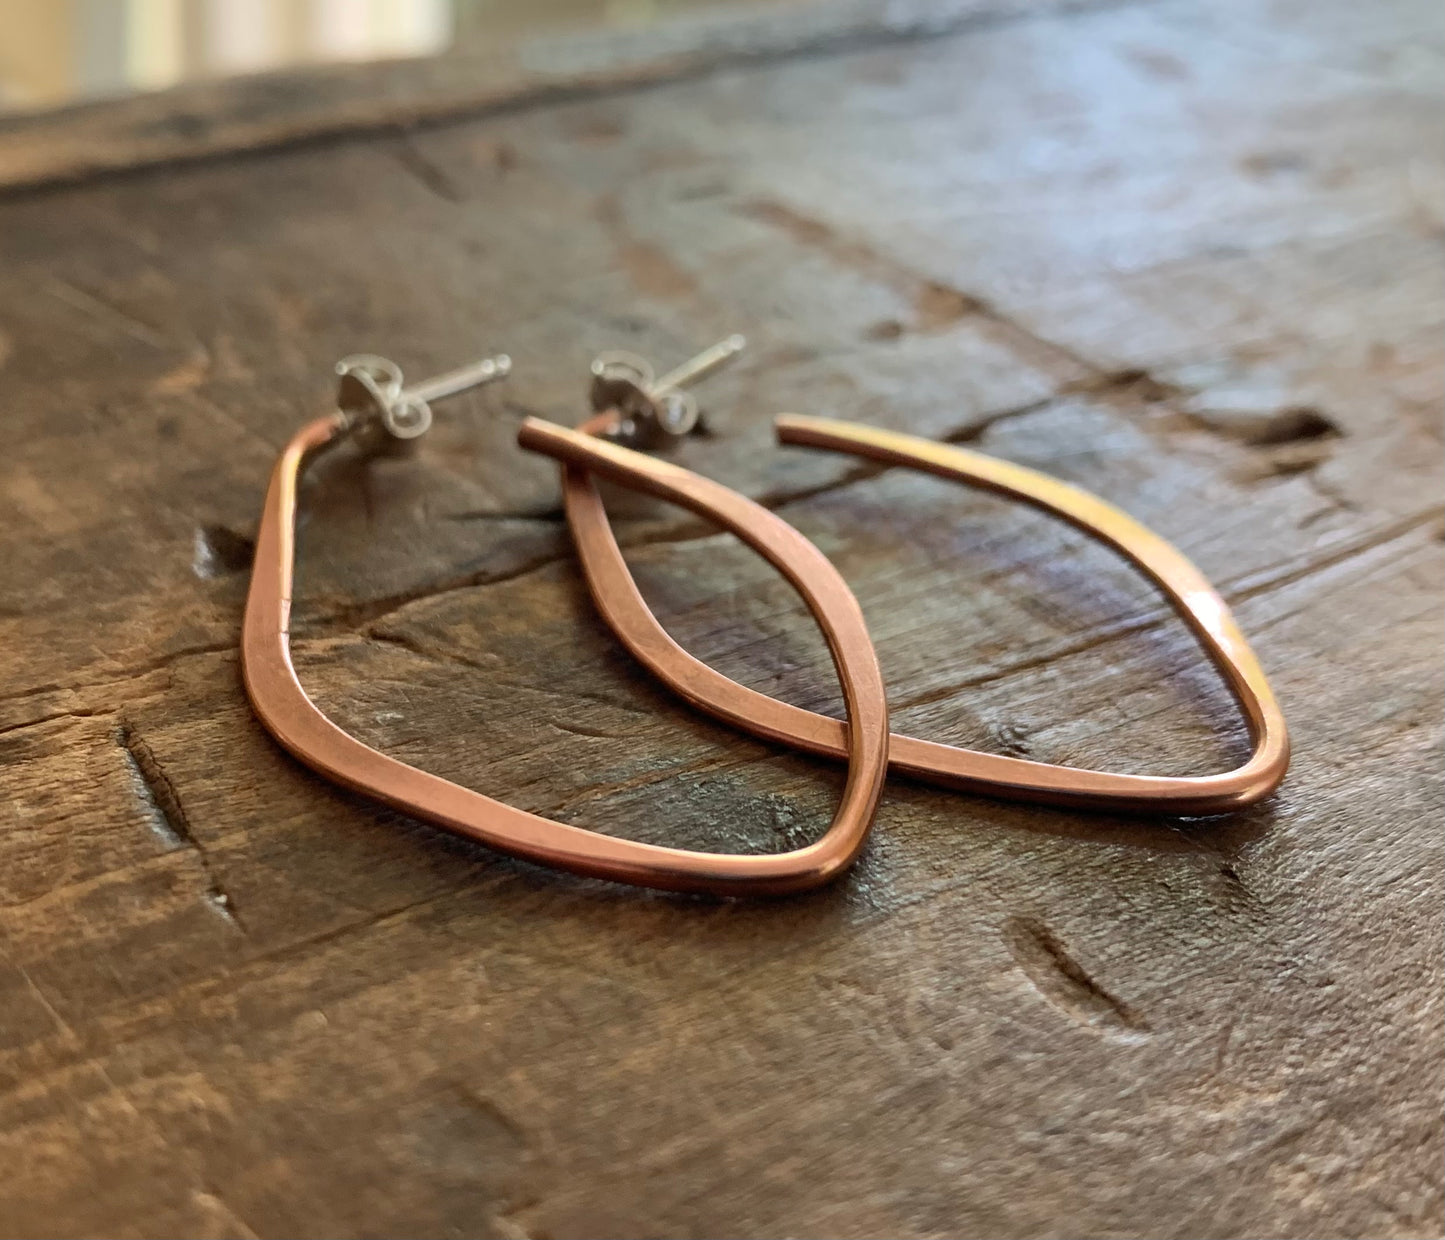 NEW Lotus Hoops - Thick Gauge Copper & Sterling Silver Post Hoops. Handmade. Hammered. Light Weight Hoops